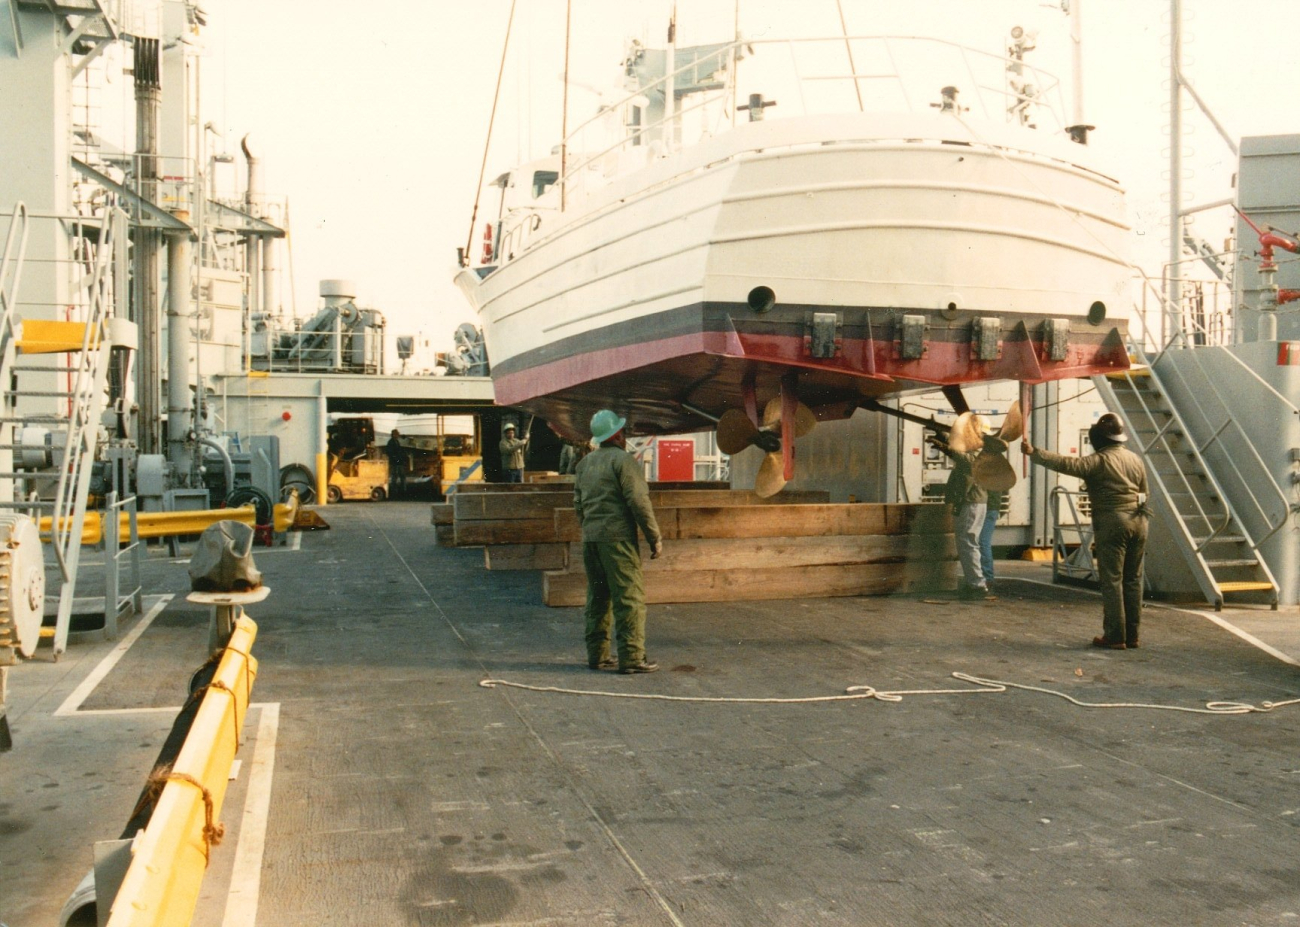 NOAA Launch 1257 being lowered to deck of  USNS cargo ship prior totransport and transfer to government of Malta